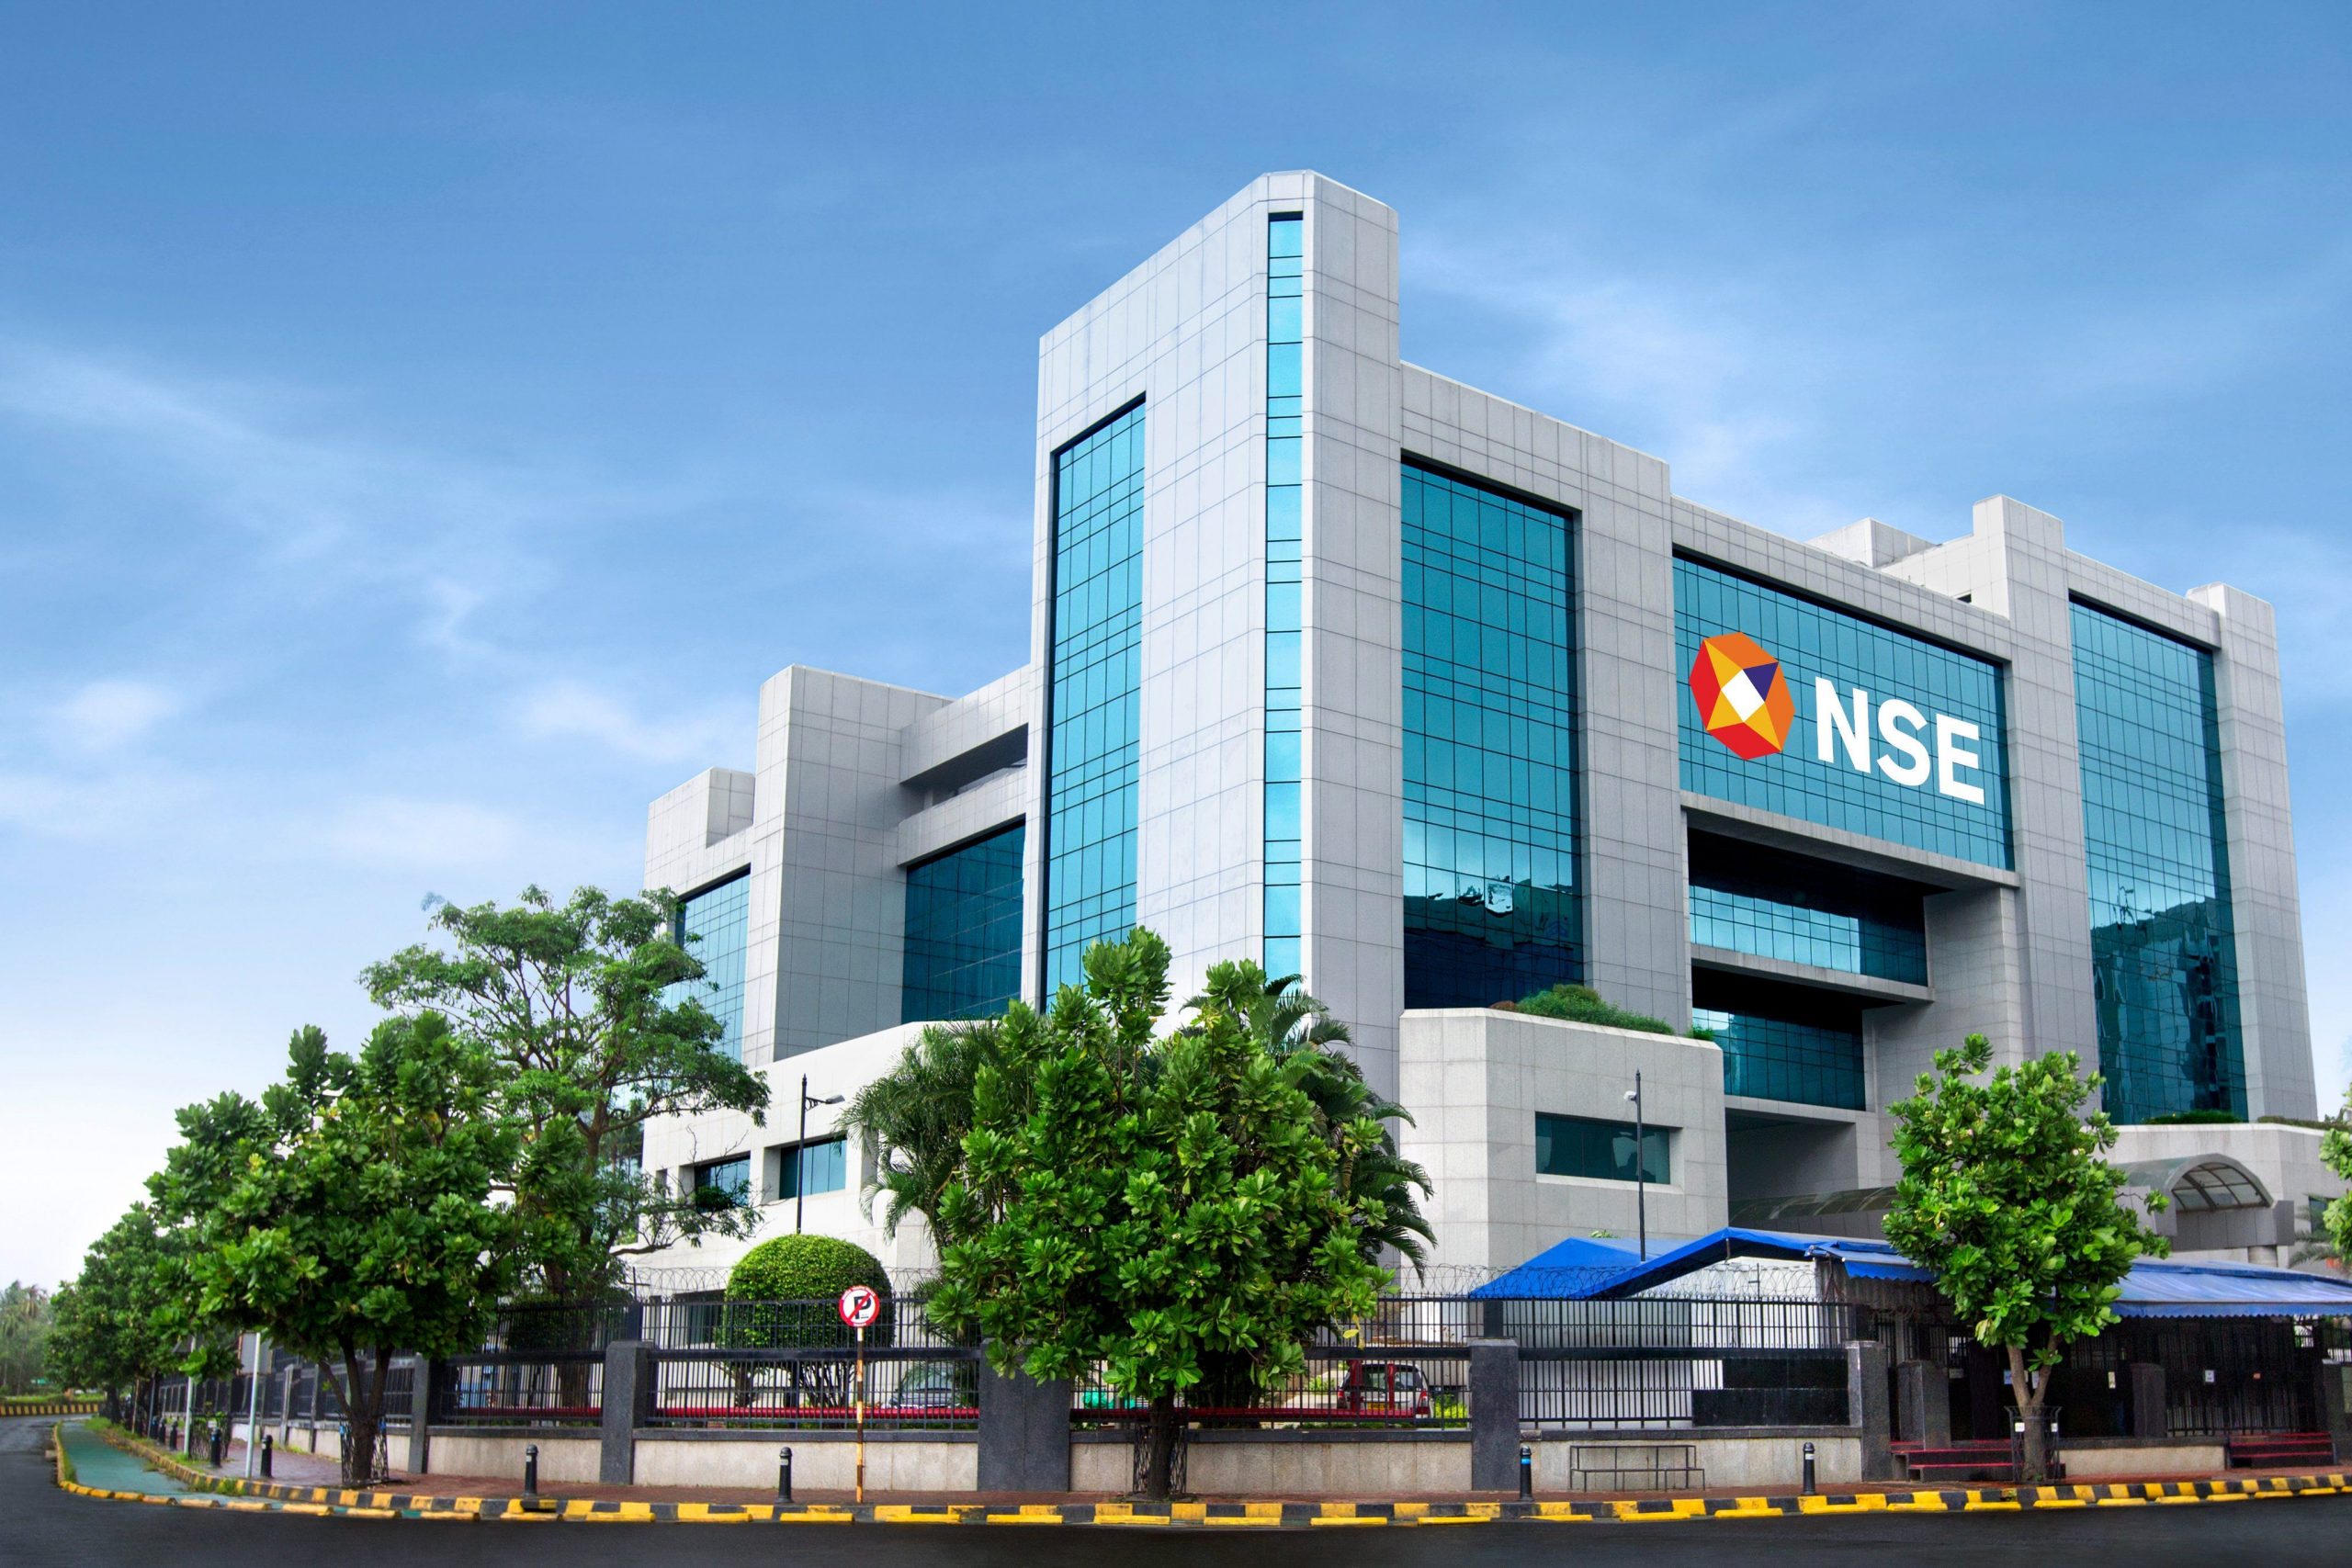 NSE F&O Ban: PVR, Sun TV and others under ban on Wednesday, March 30, 2022